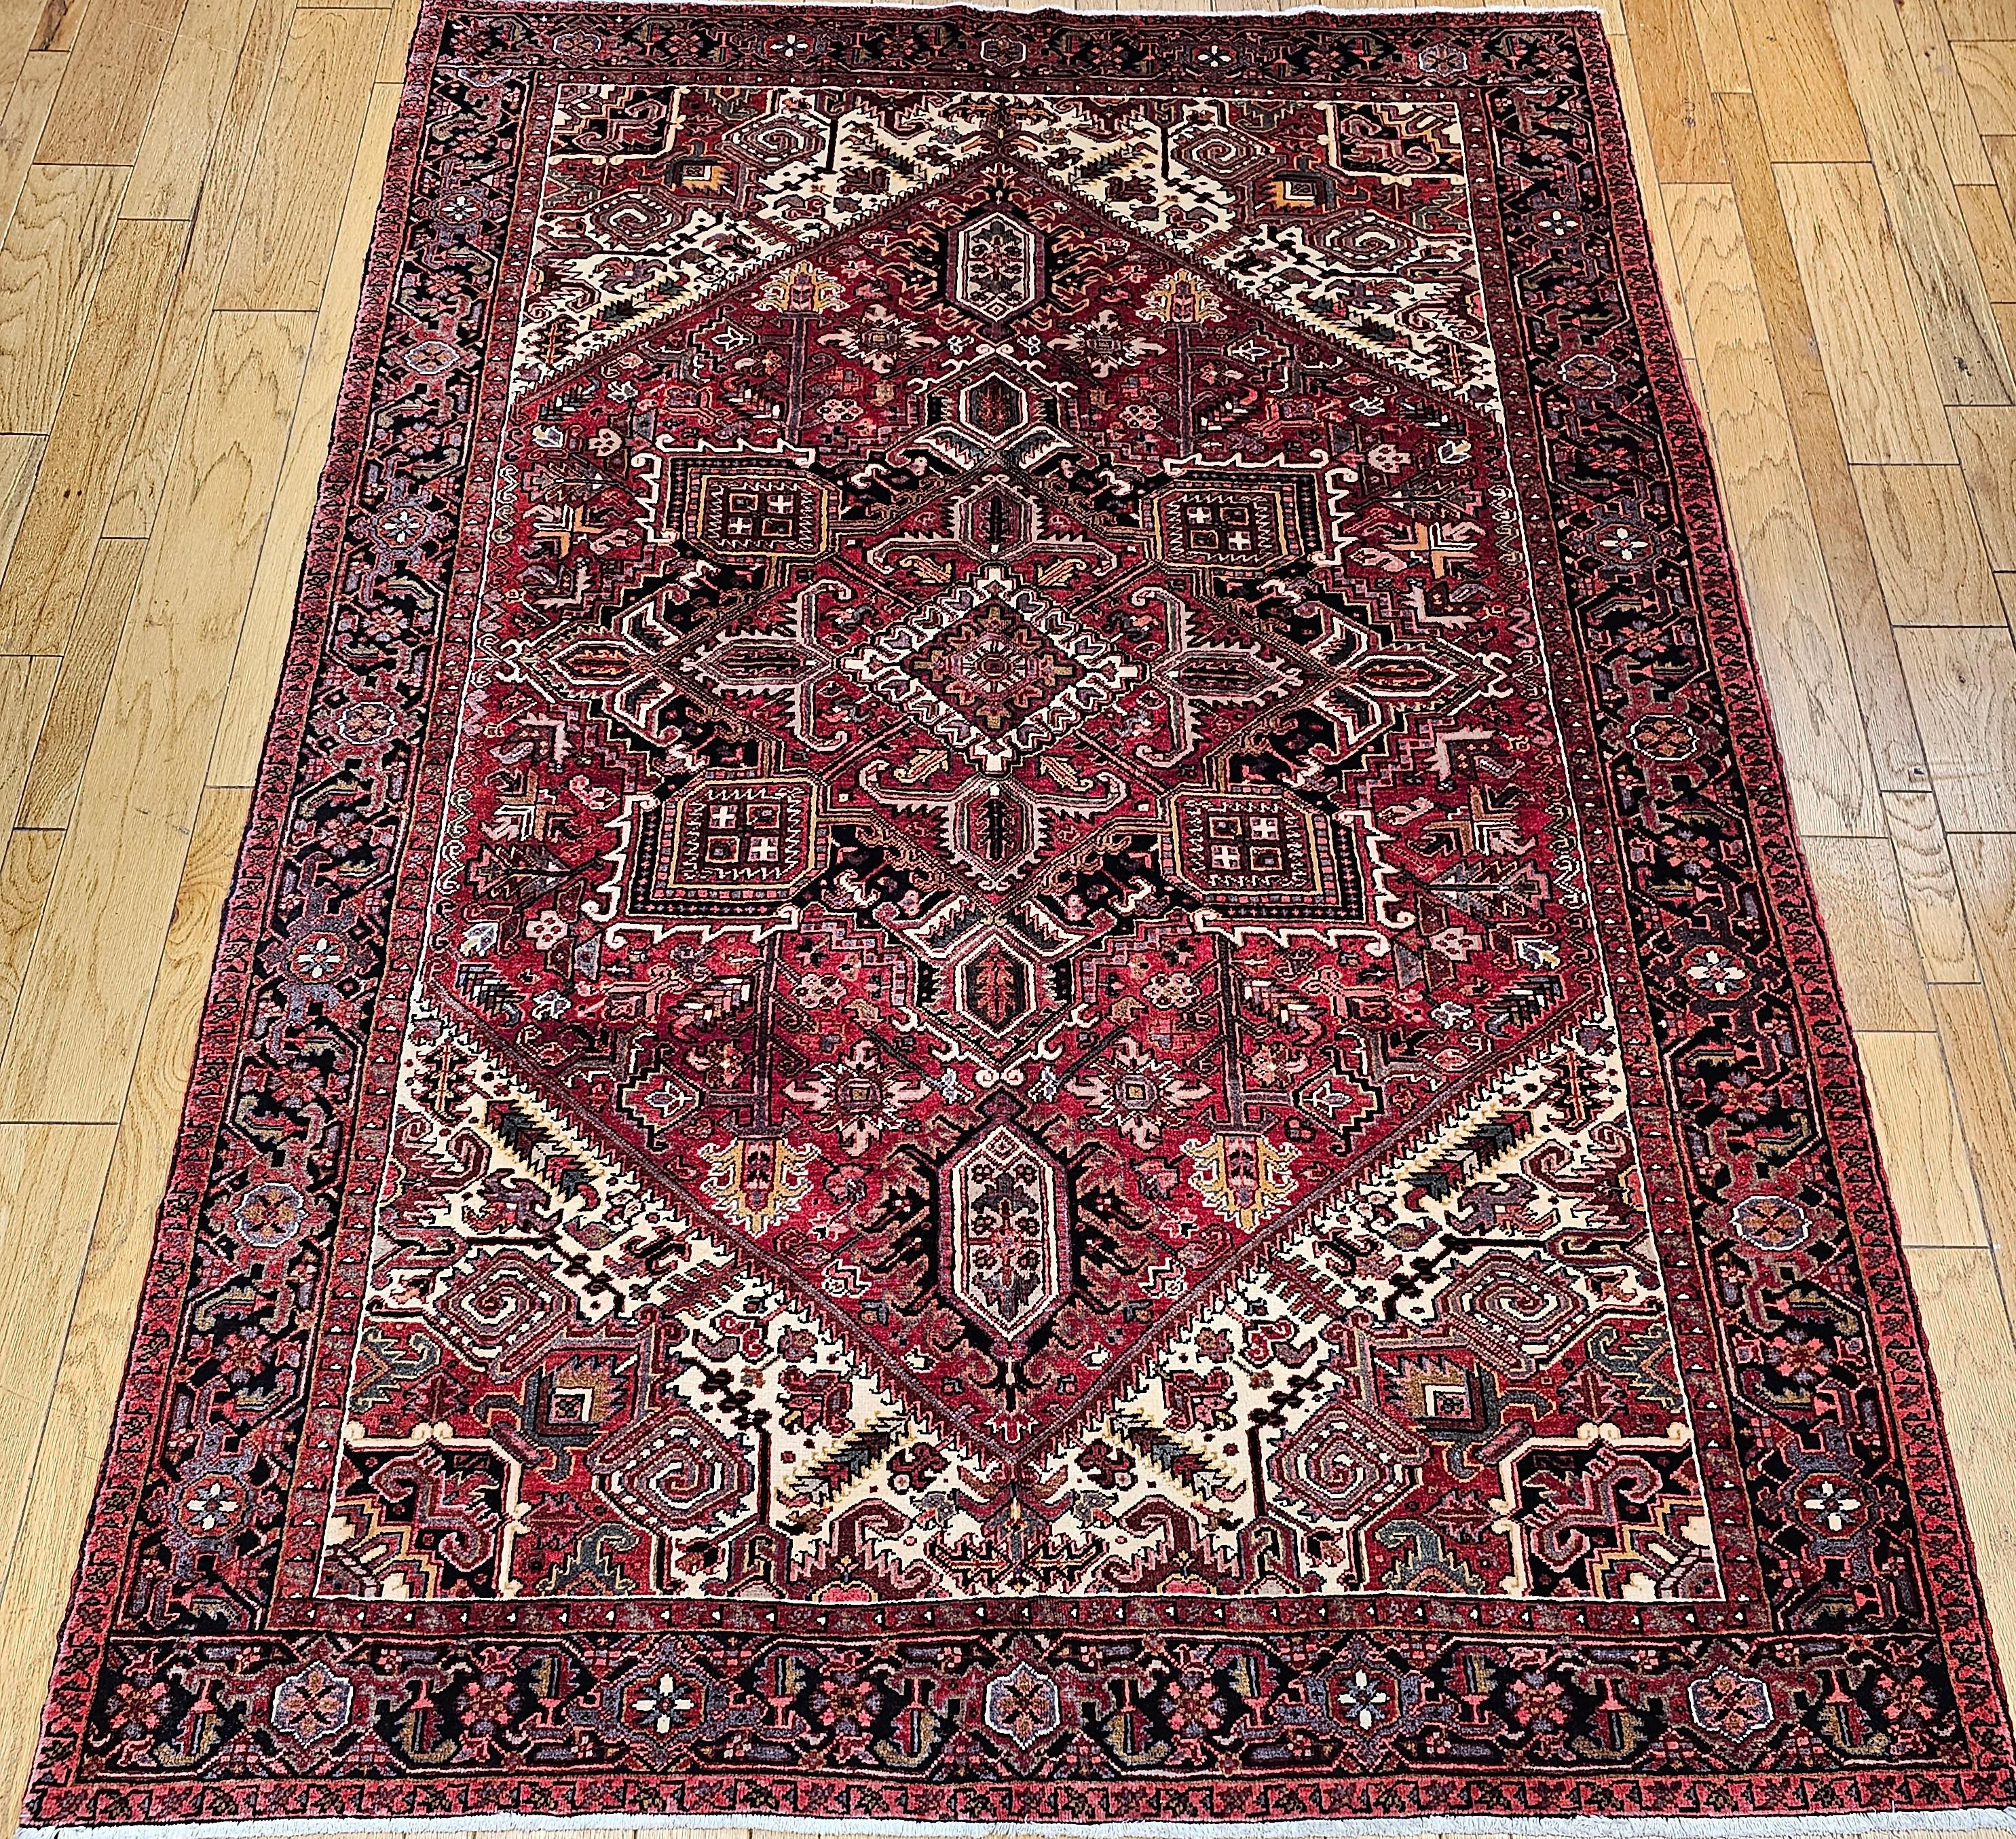 A room-size Persian Heriz rug from the 3rd quarter of the 1900s.  This Heriz has a brick-red field with a central medallion in dark blue and red.  The corner spandrels are in ivory color with geometric designs in yellow, green, blue, and red.  The